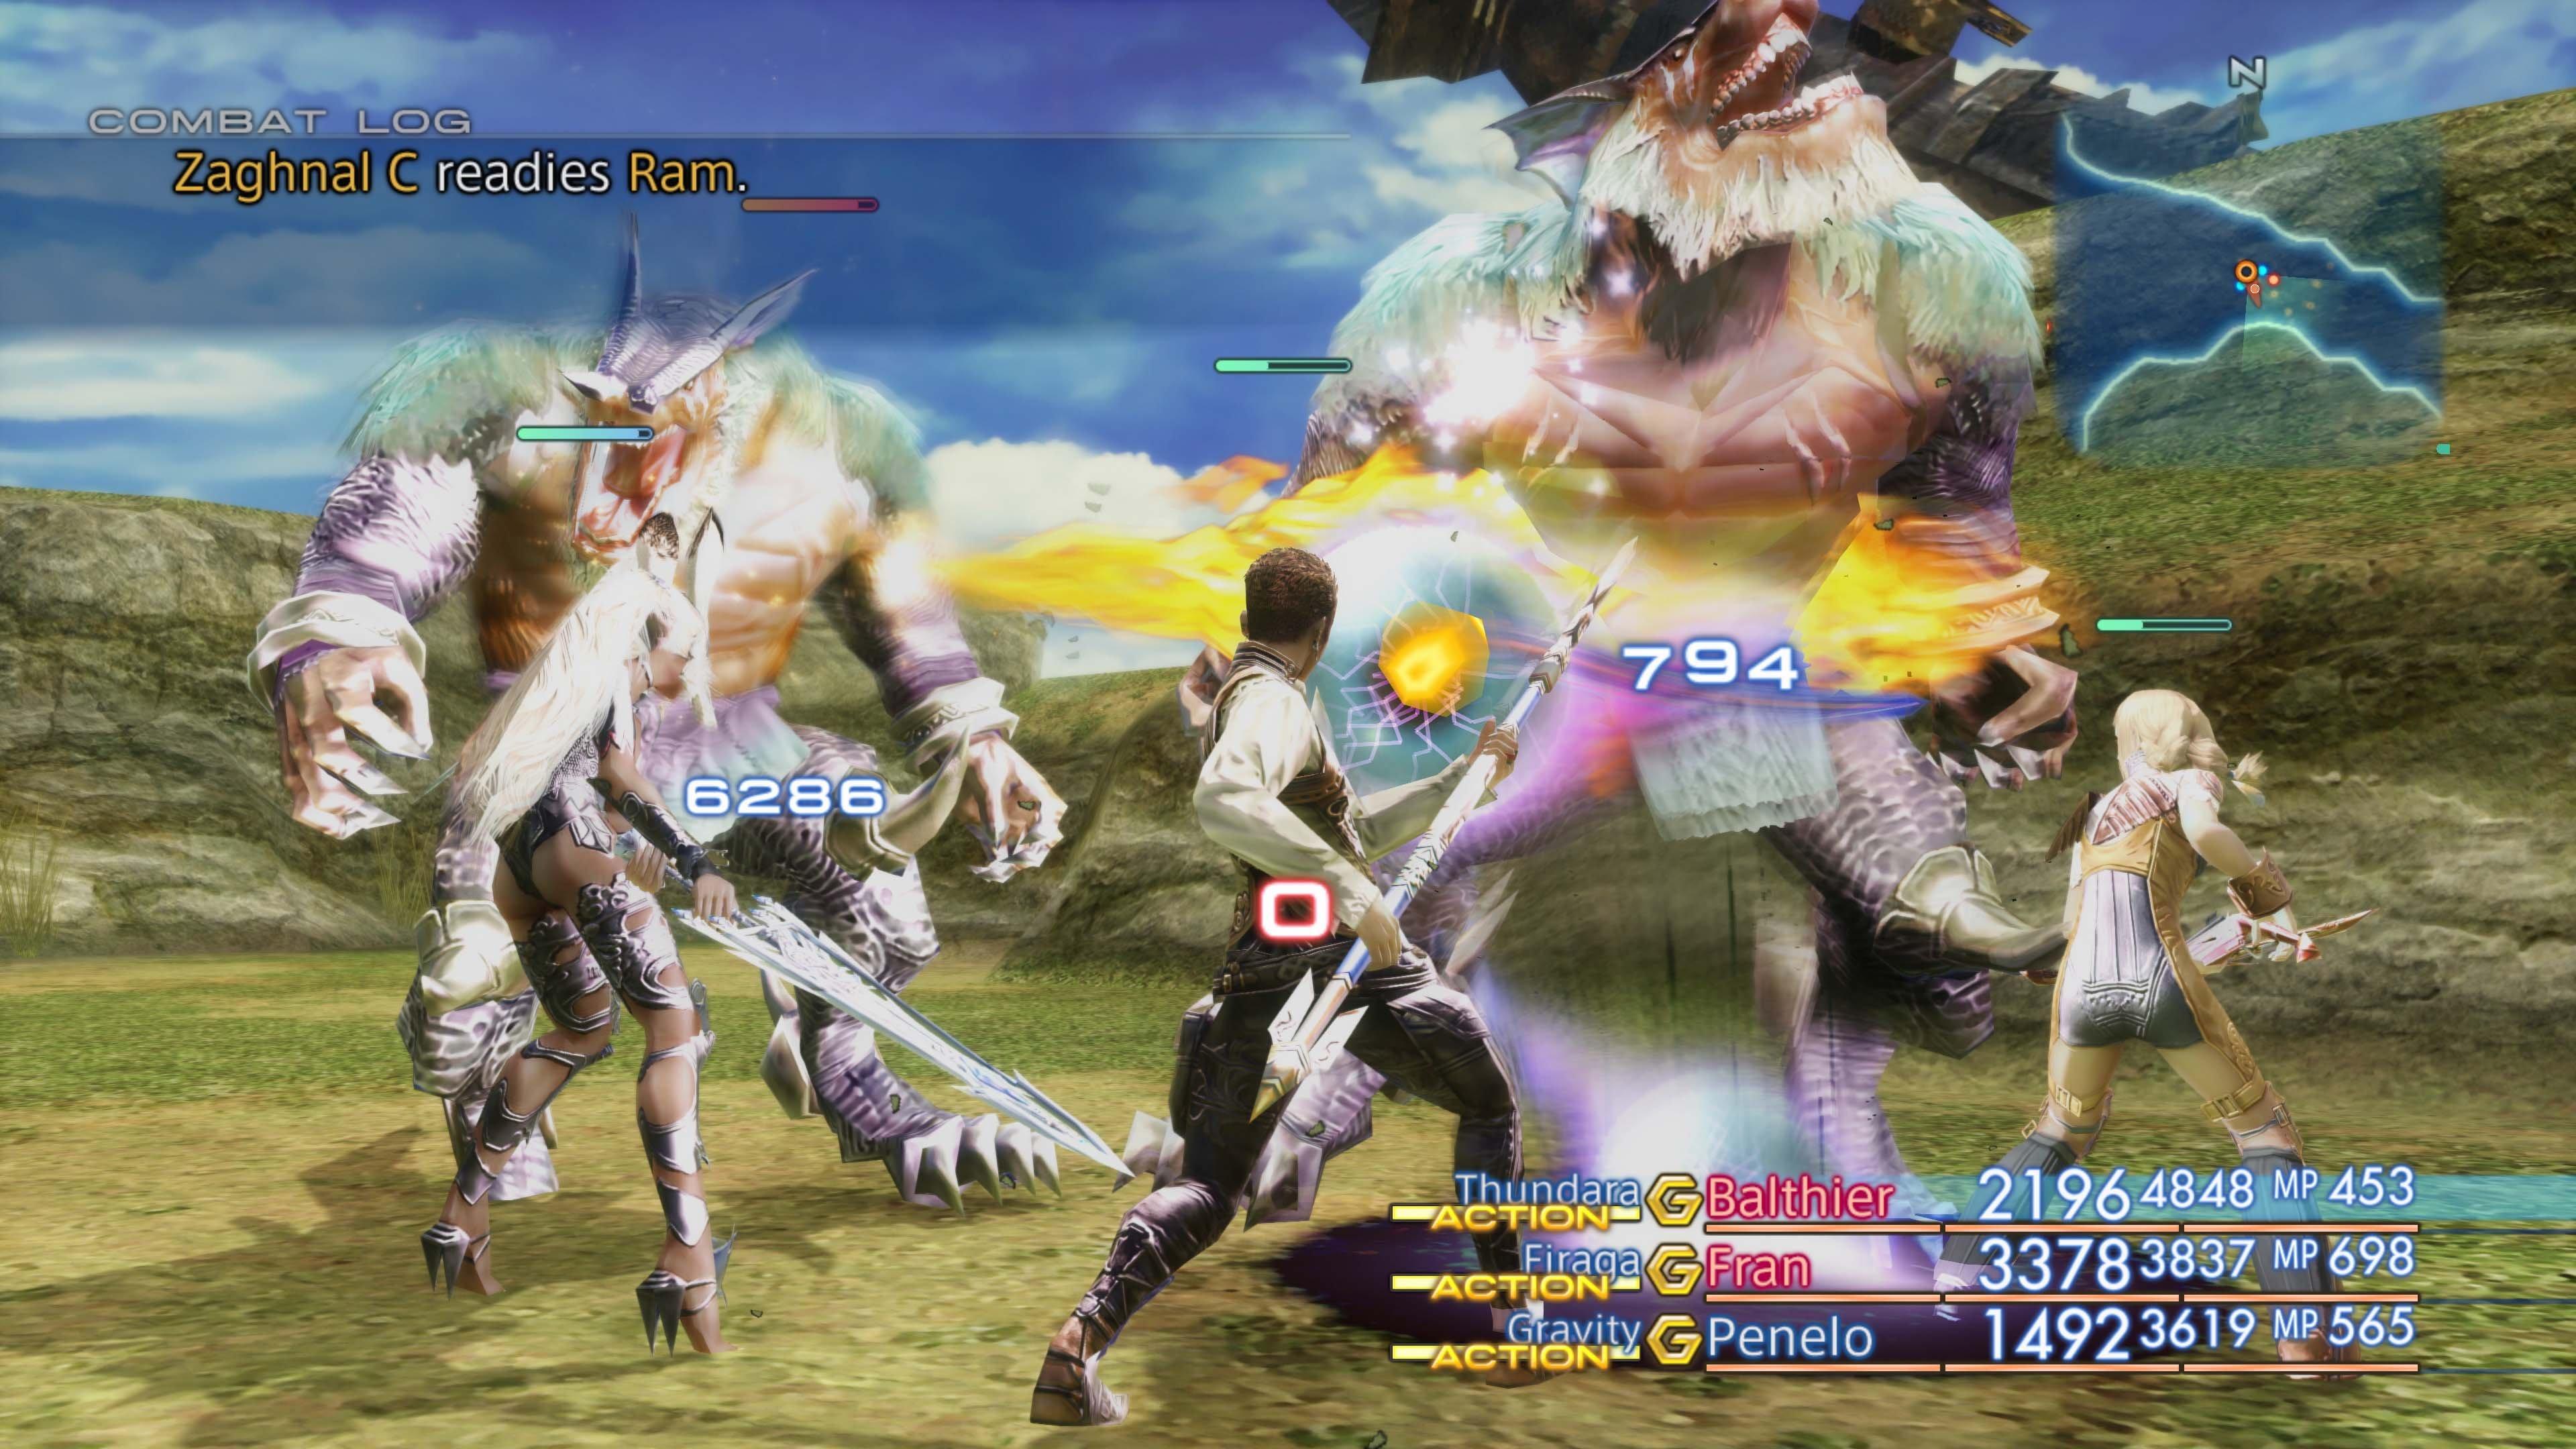 Final Fantasy XII: The Zodiac Age launches July 11 in North